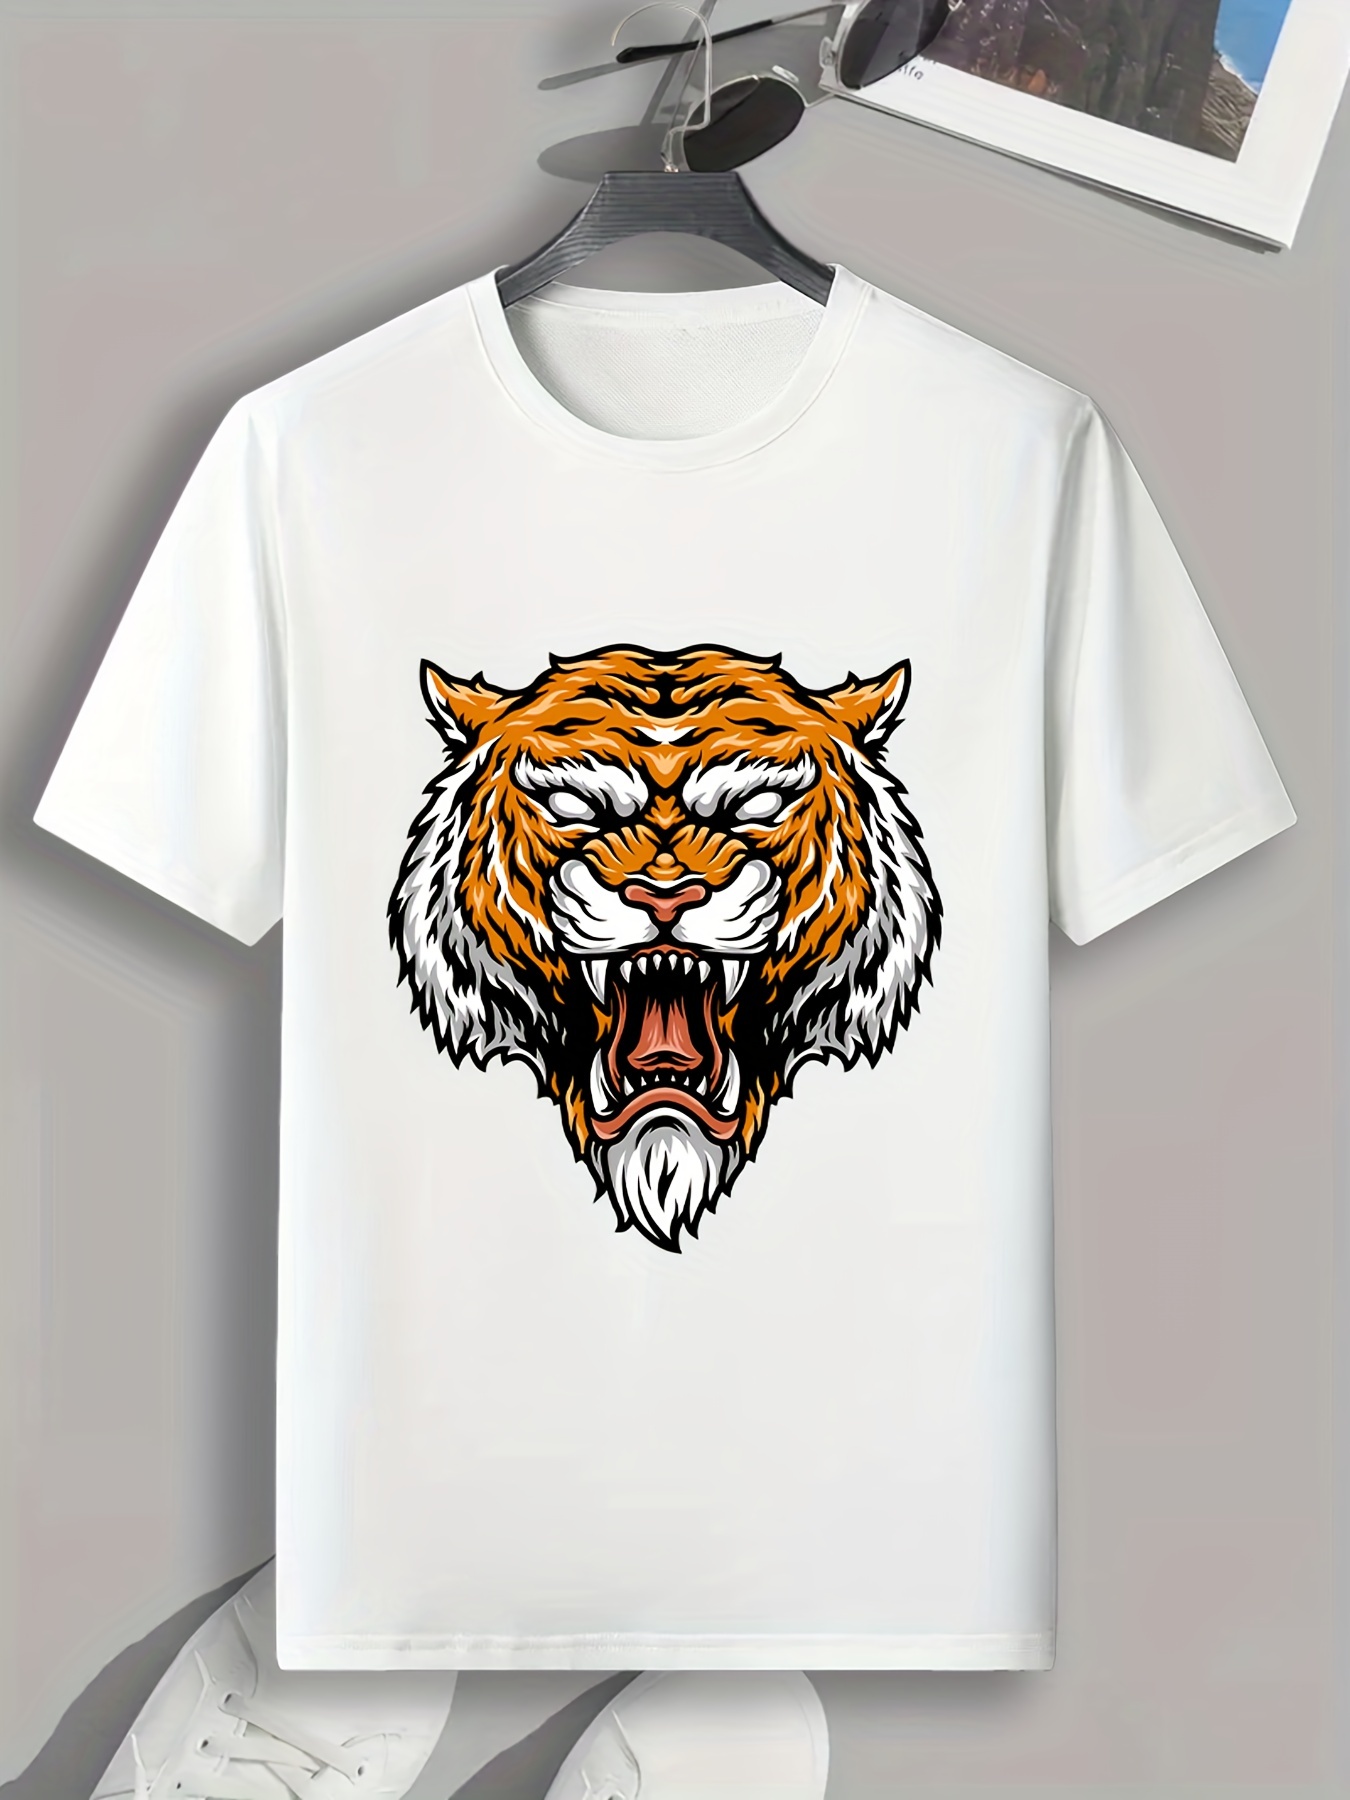 Tiger Print Mens Graphic Design Crew Neck T Shirt Casual Comfy Tees Tshirts  For Summer Mens Clothing Tops For Daily Vacation Resorts, Discounts For  Everyone